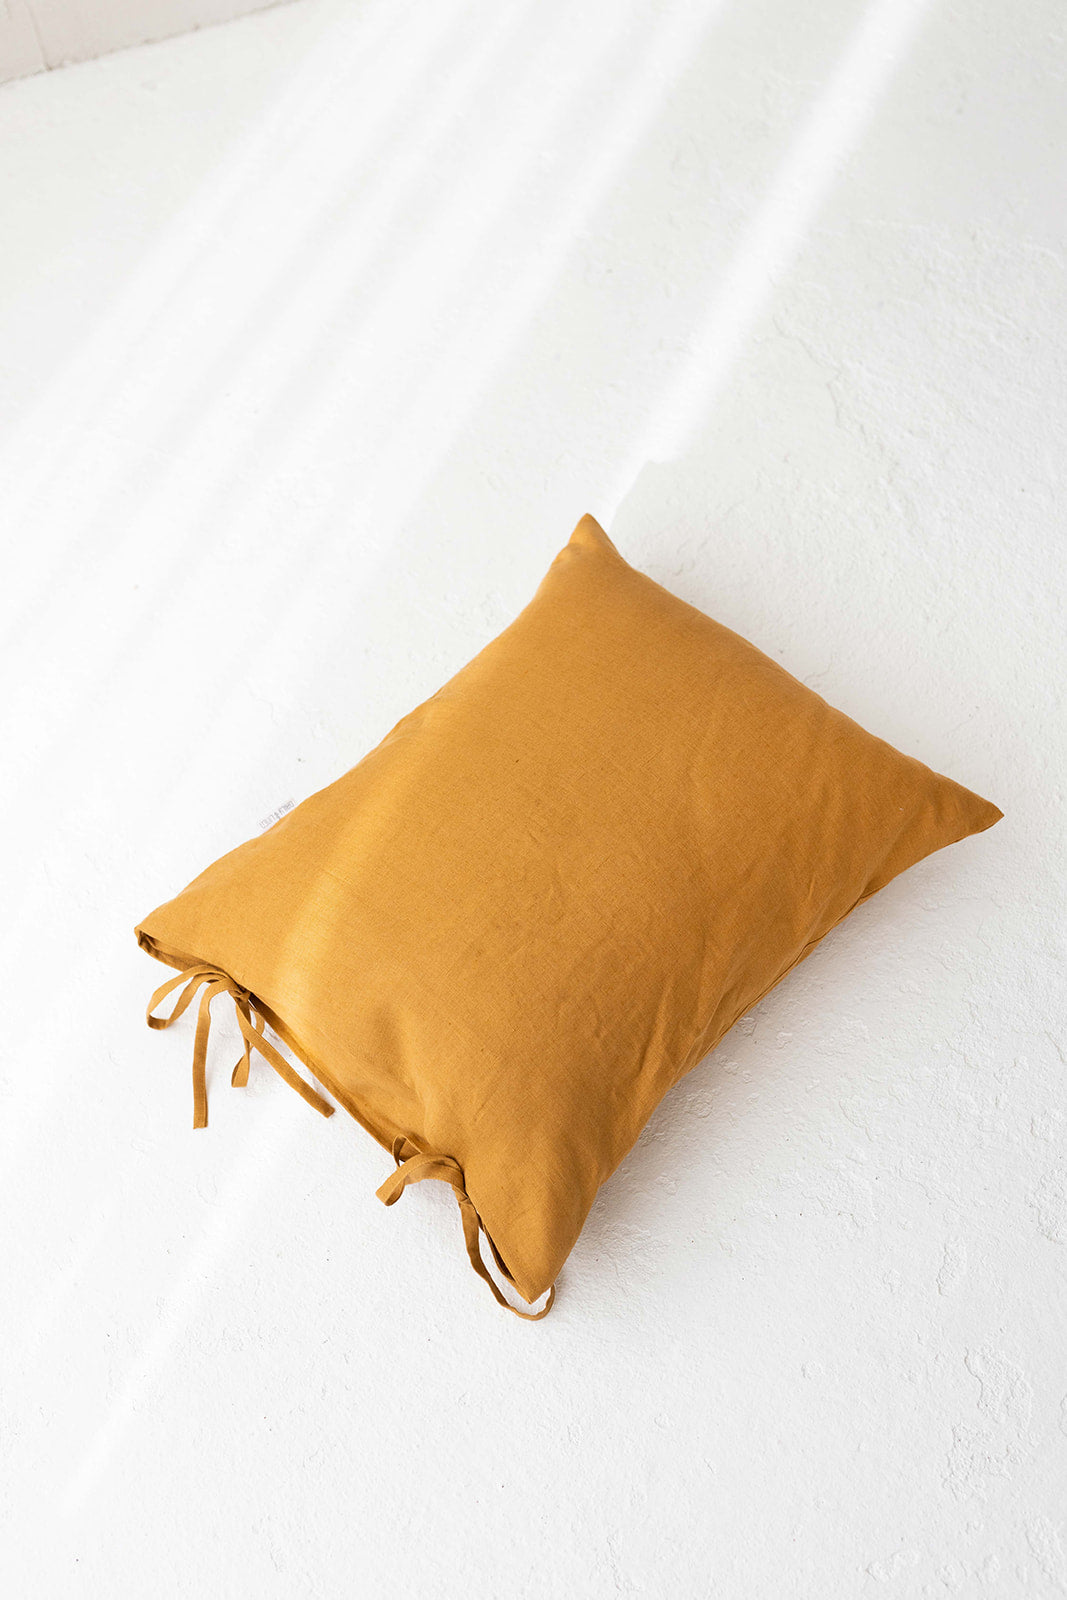 Linen Pillowcase With Ties In Amber Yellow Color - Daily Linen